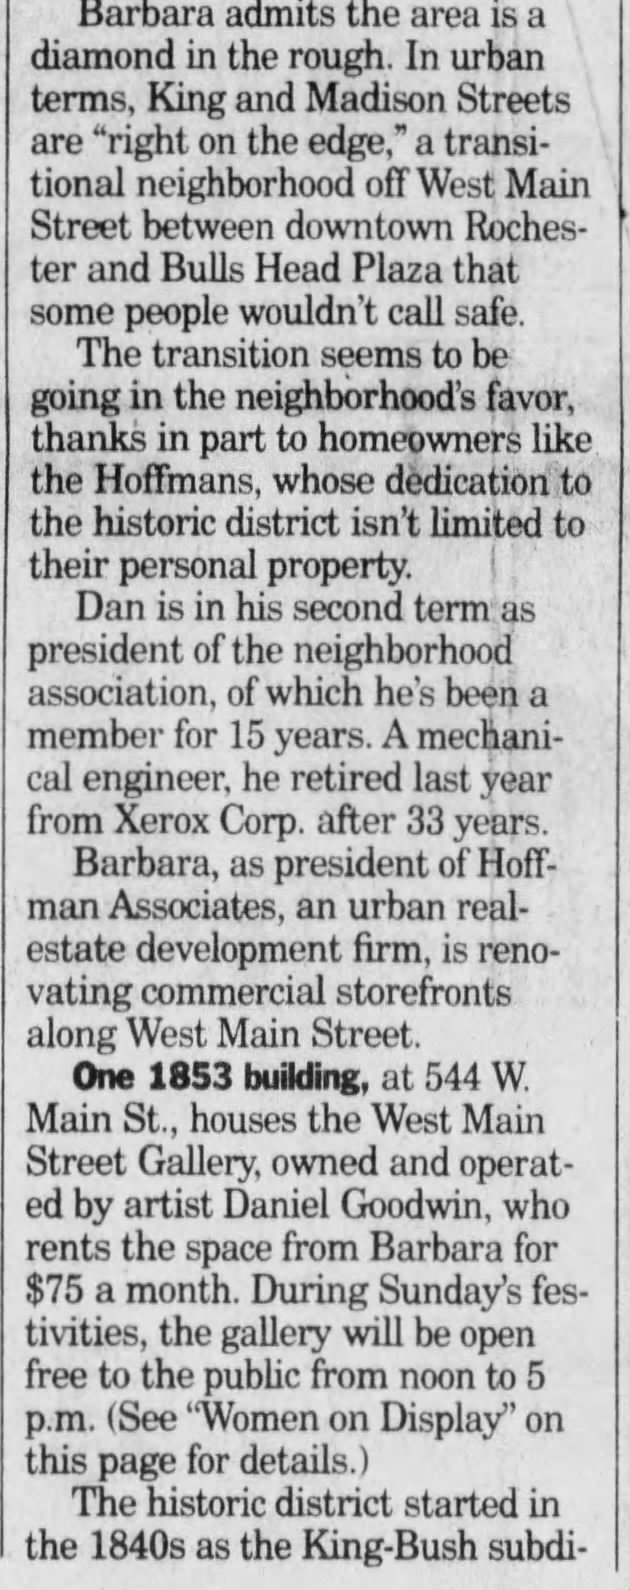 Fox Sisters Spirits, Democrat and Chronicle (Rochester, NY) 24 Aug 1995 Thu P27